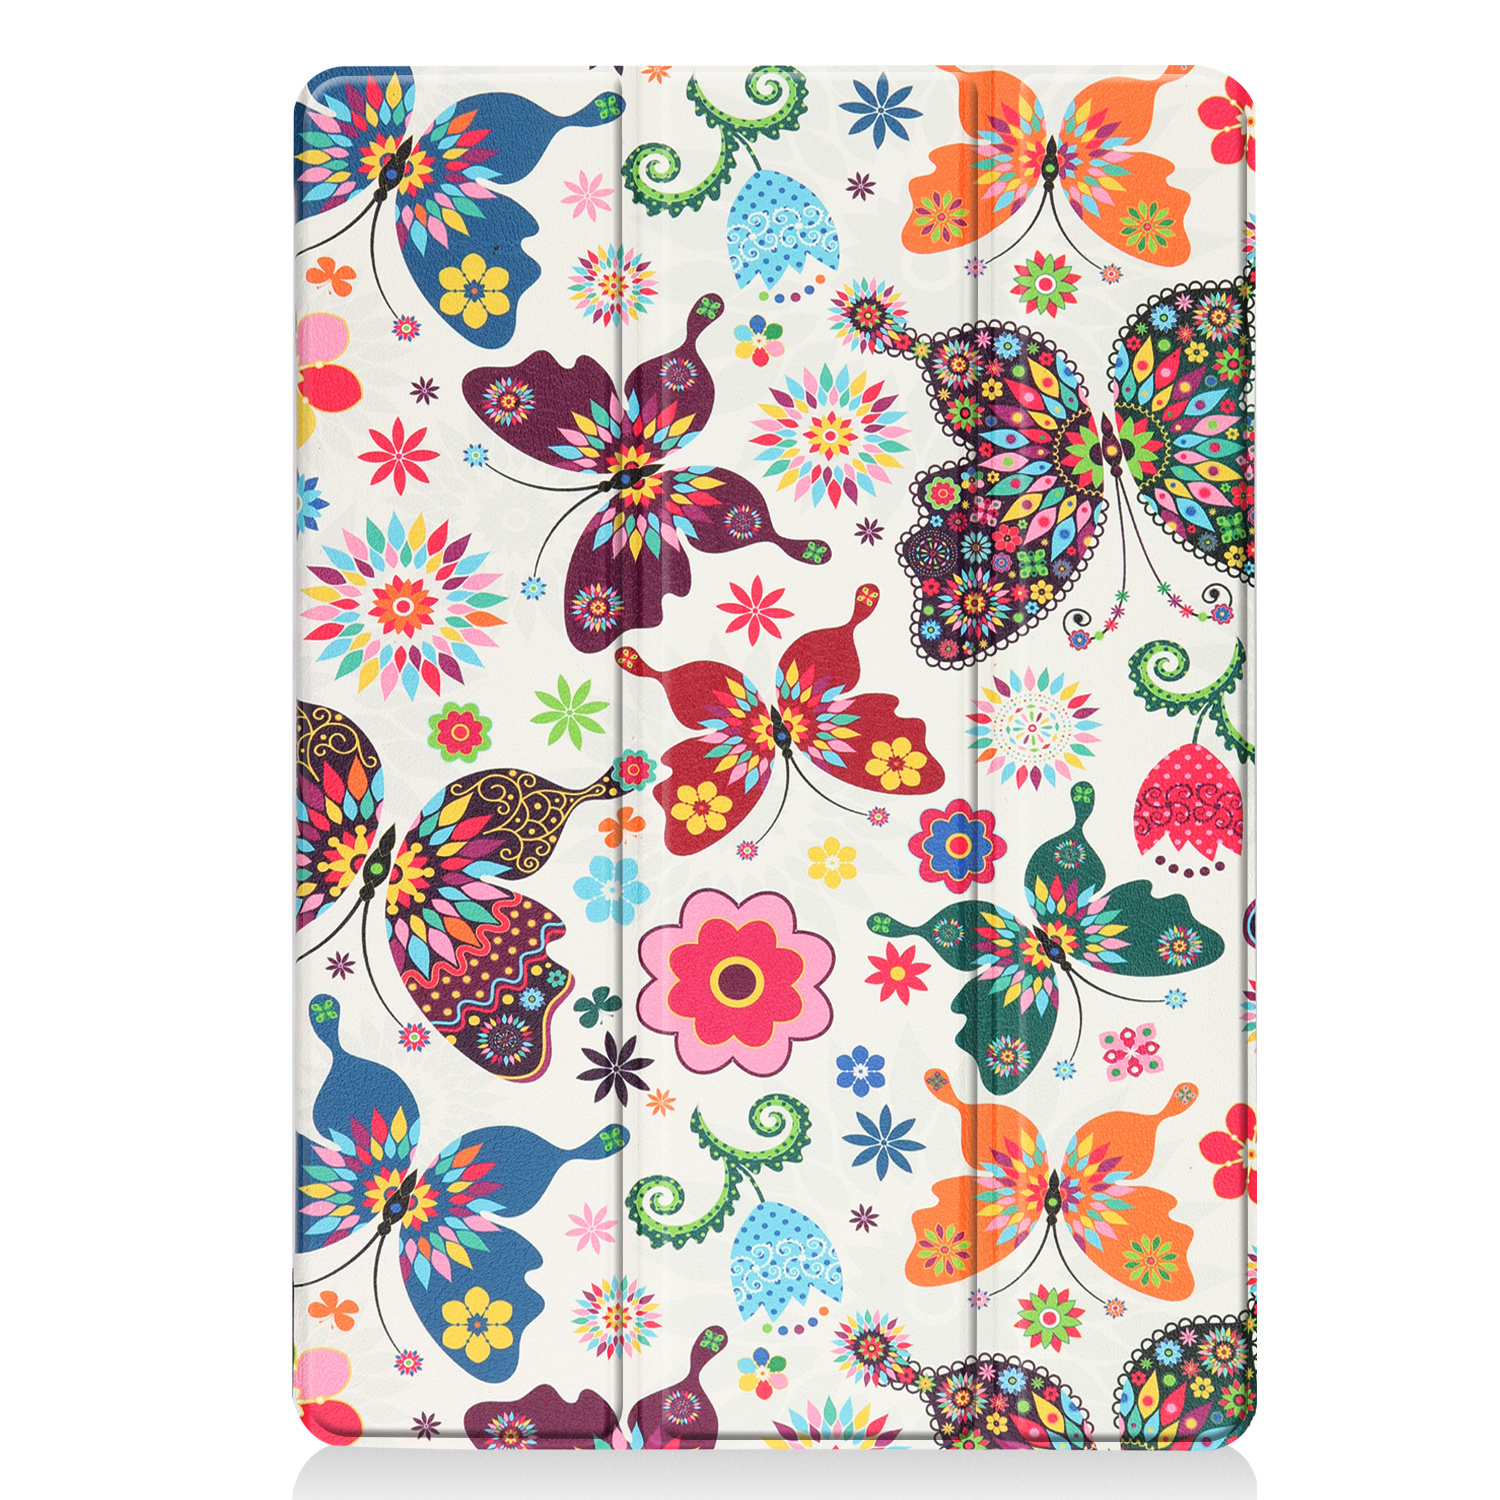 Nomfy iPad 10.2 2020 Hoesje Book Case Hoes - iPad 10.2 2020 Hoes Hardcover Case Hoesje - Vlinder